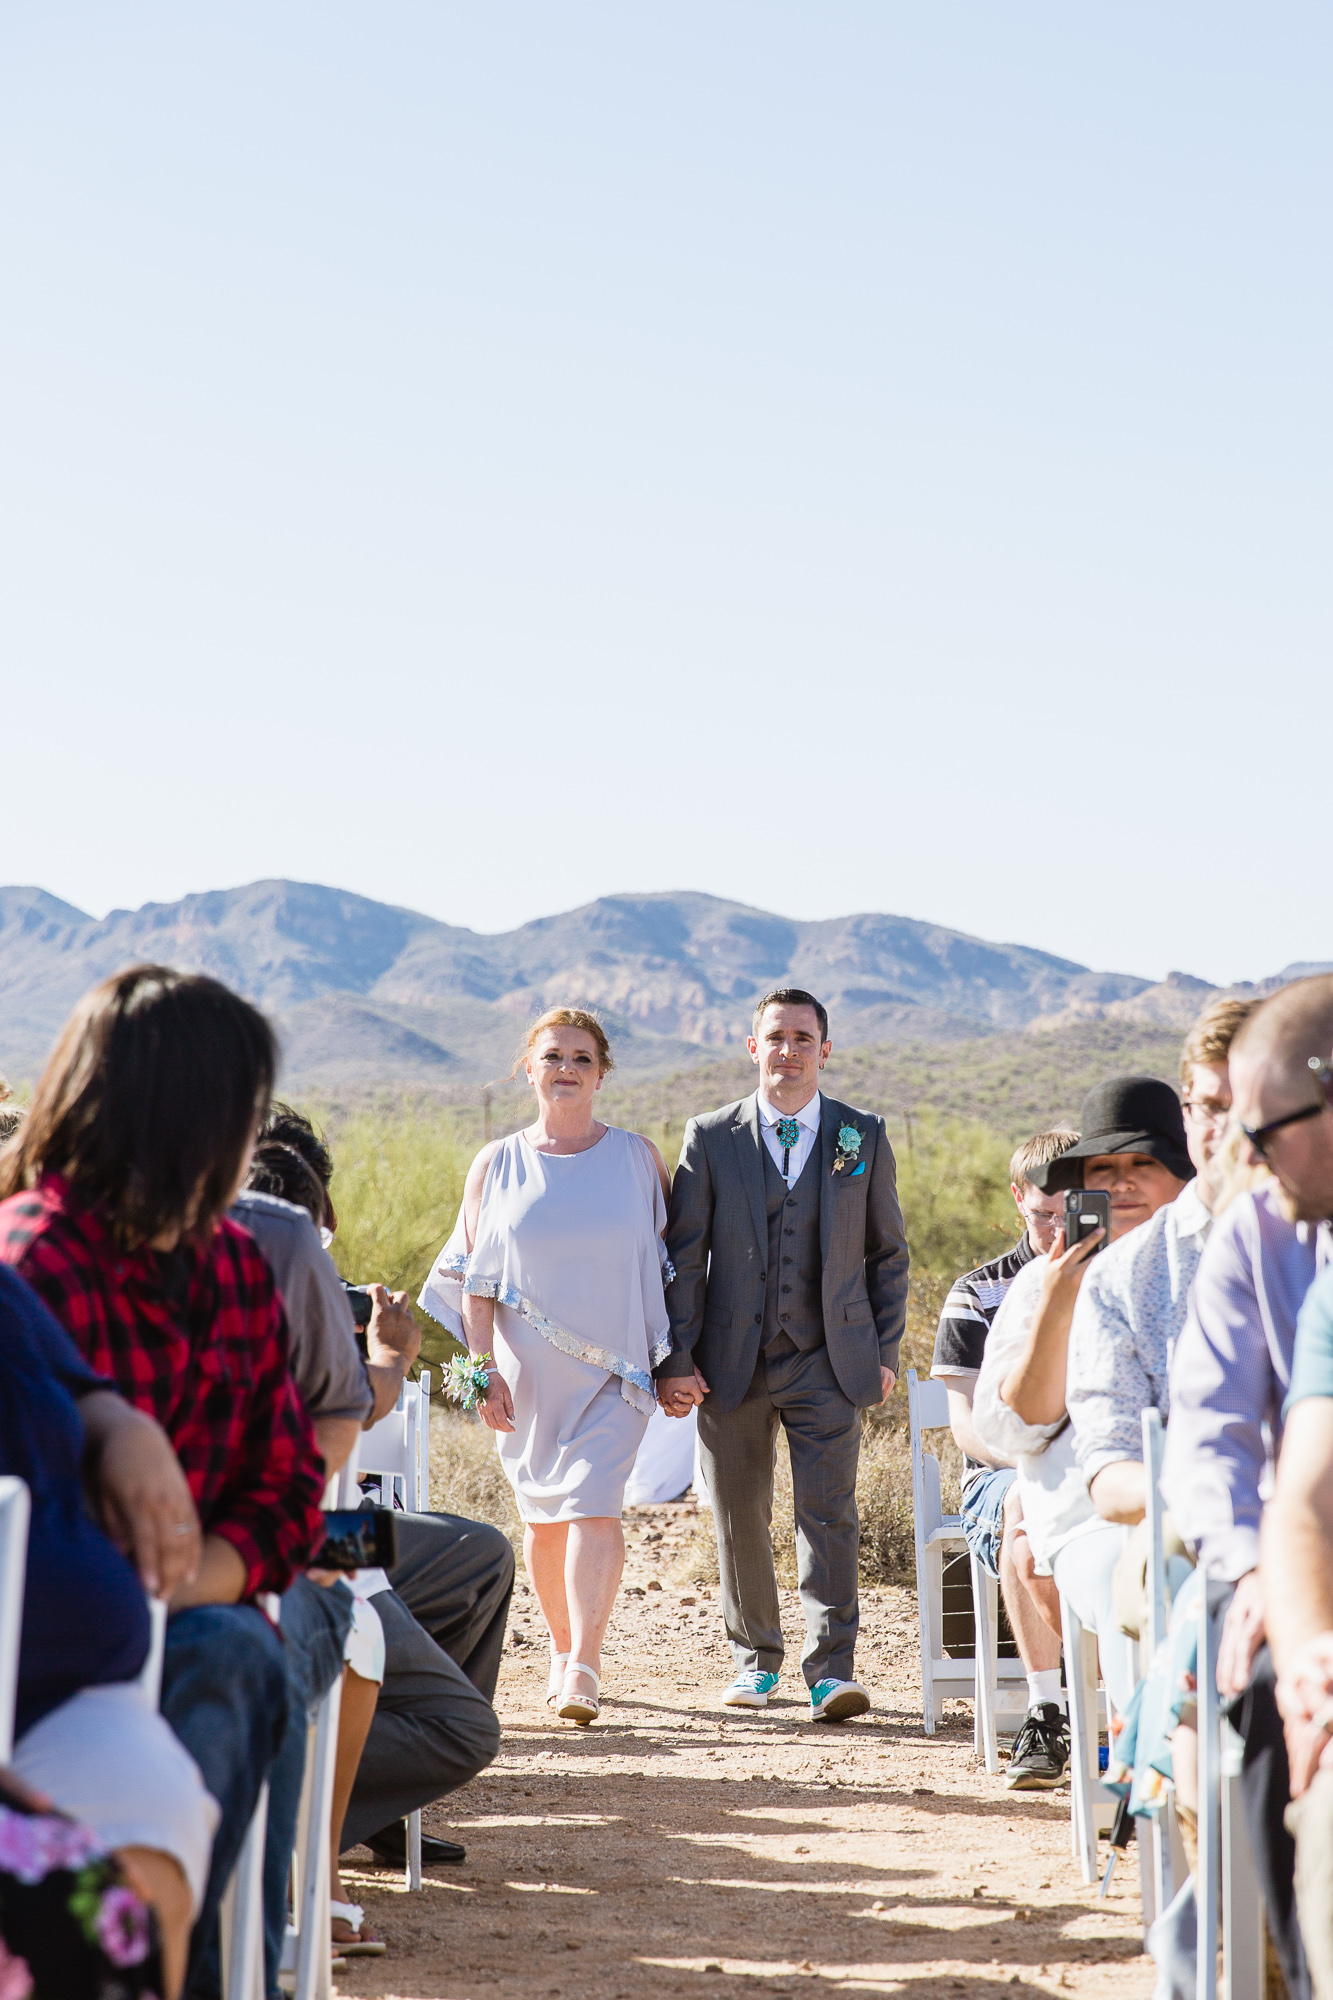 Groom walking down the aisle with his mother at Lost Dutchman State Park by Arizona photographers PMA Photography.